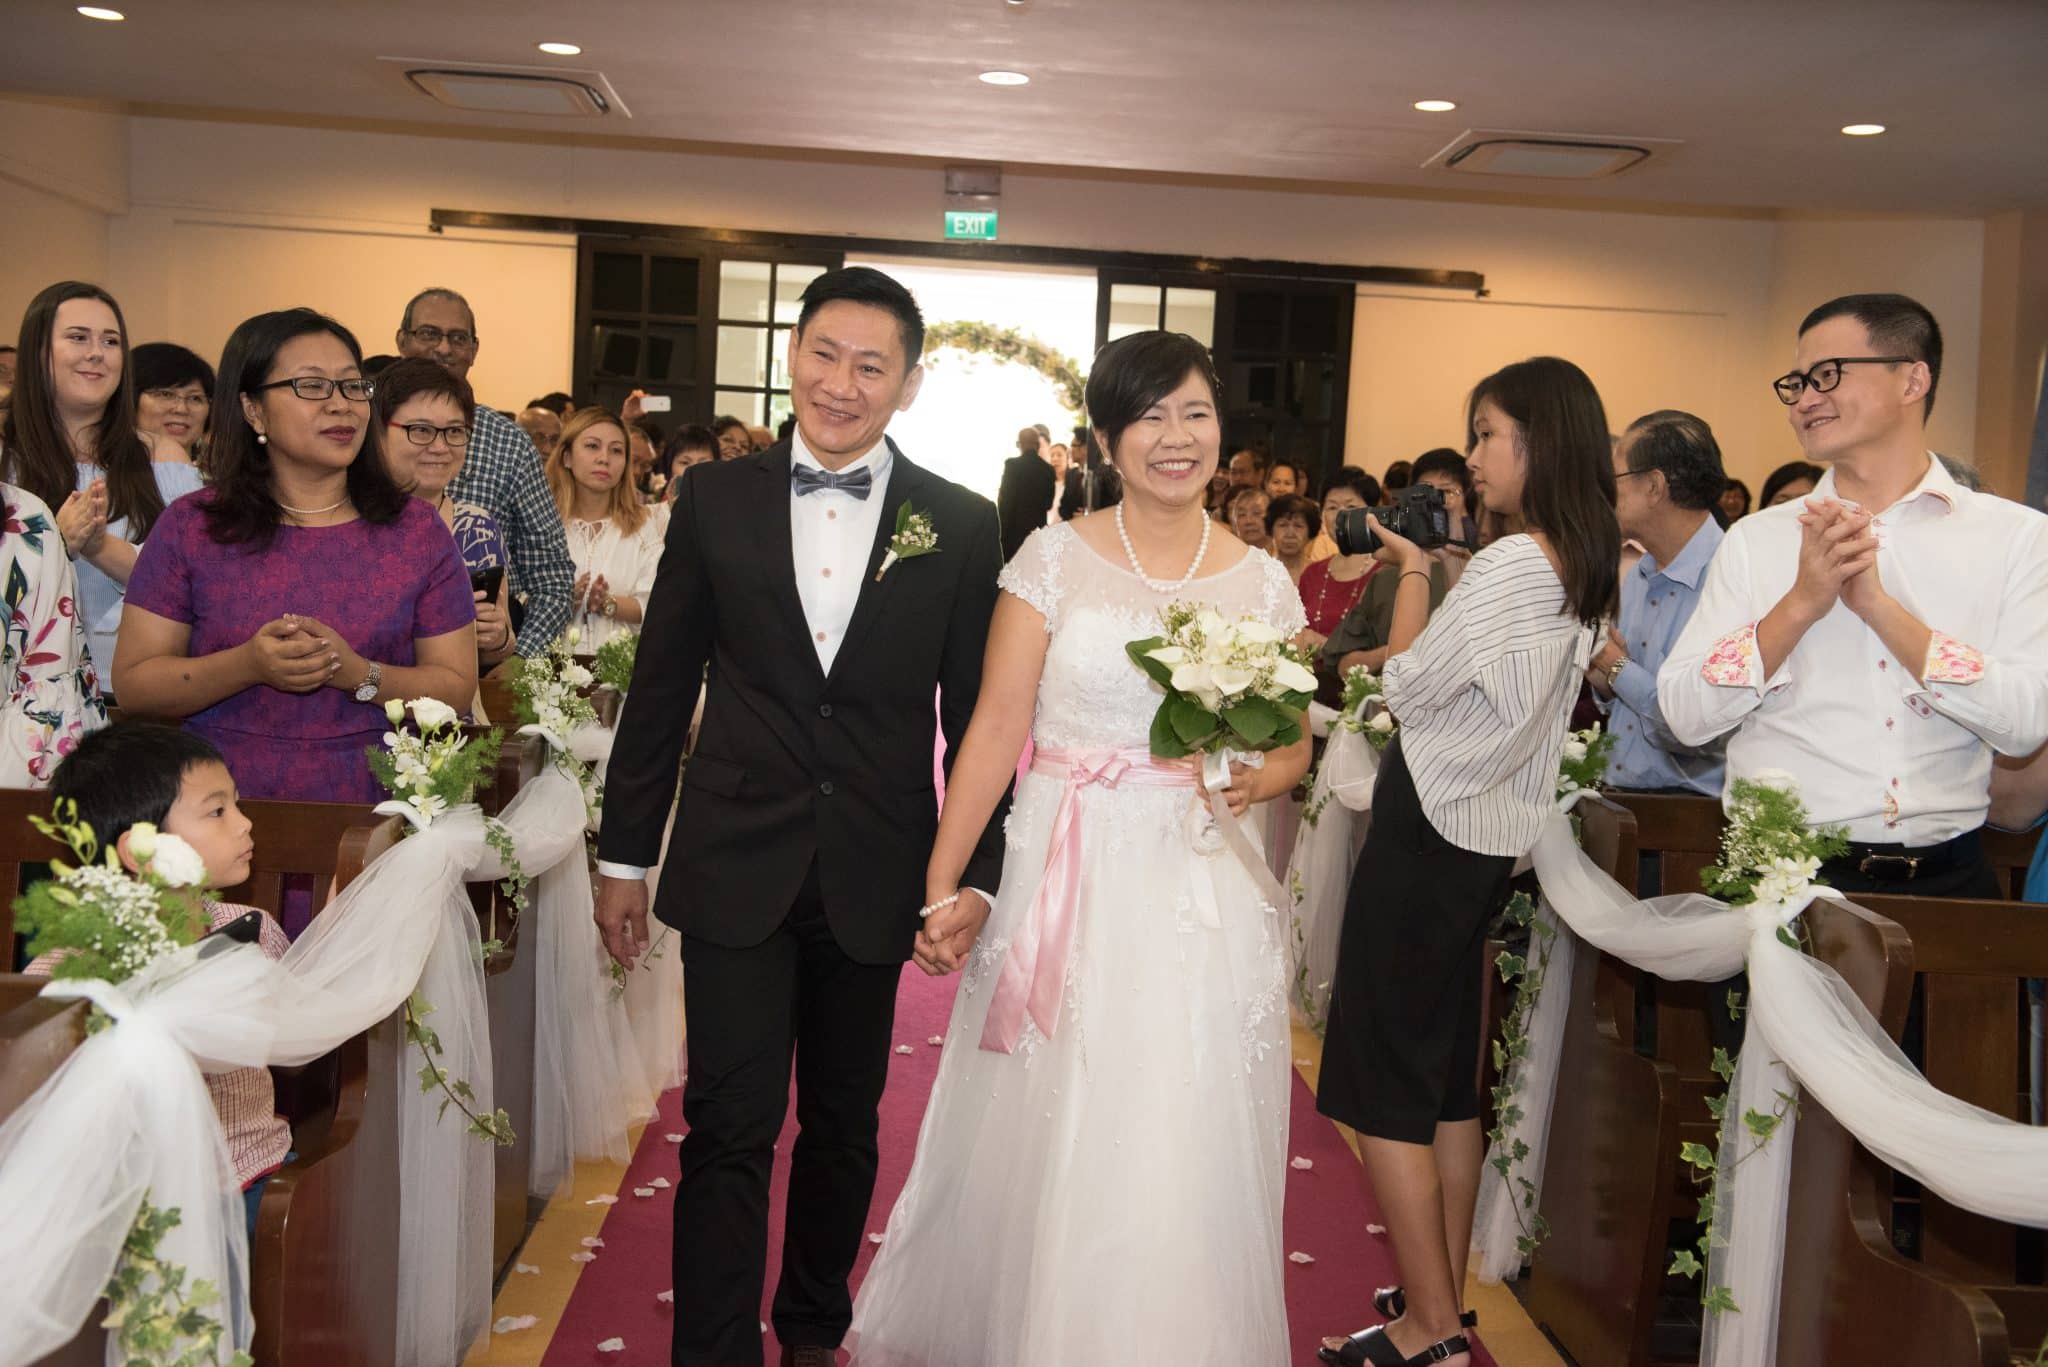 Though they are from vastly different backgrounds, and only got married in their late 40s, Jeremy Tan and Dora Lim are confident of this: 